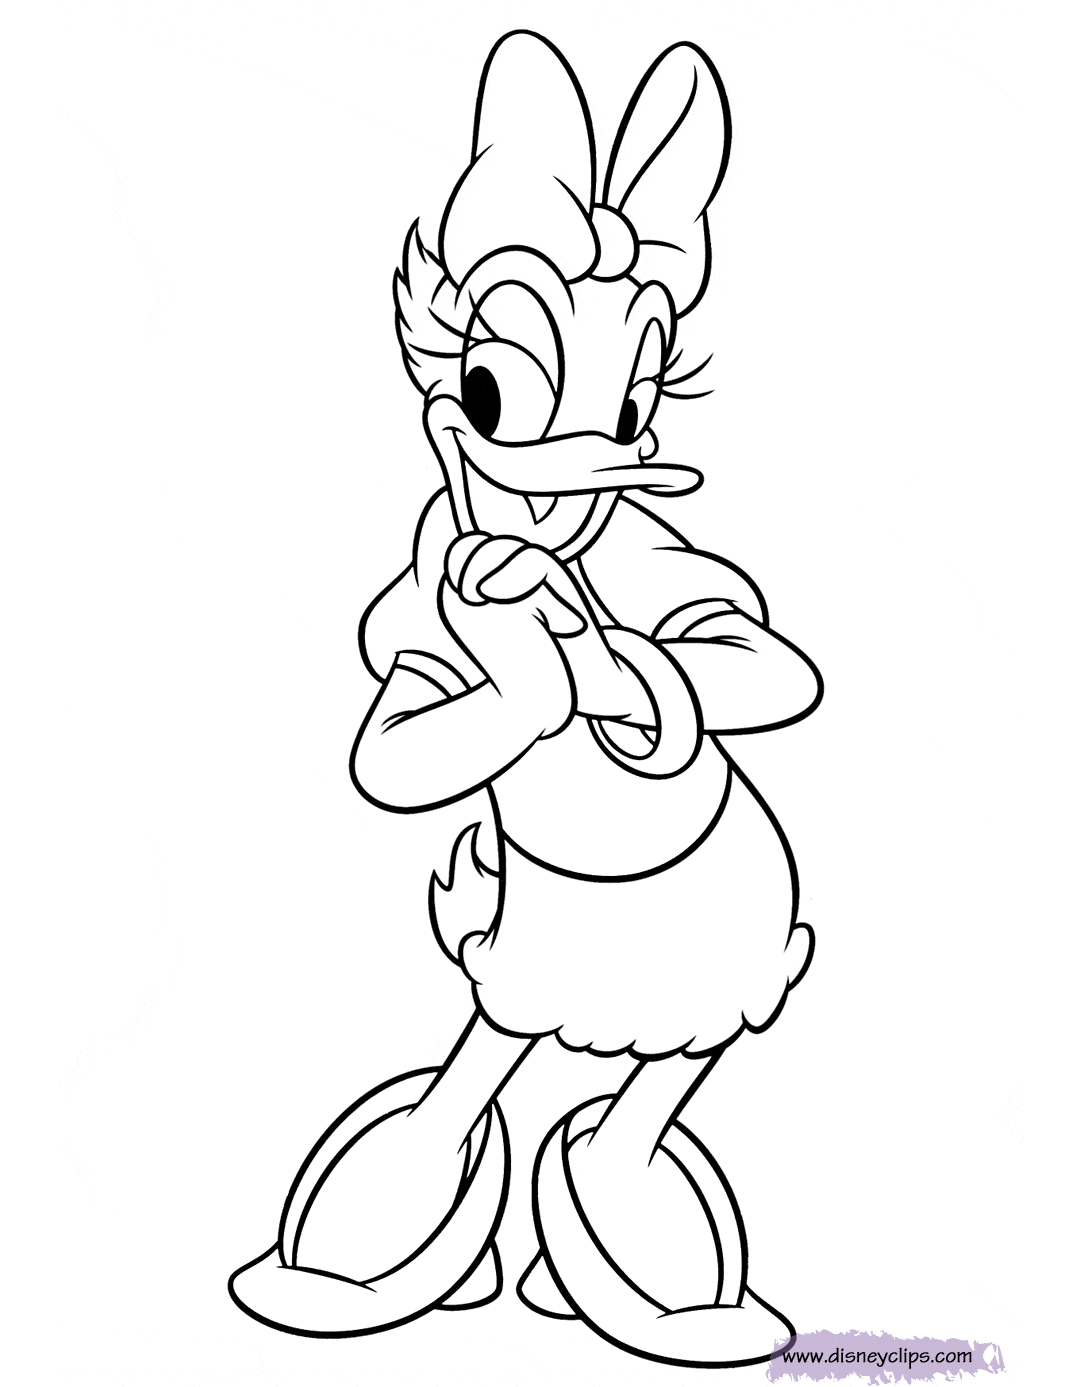 Daisy duck coloring page disney coloring pages coloring pages disney princess coloring pages